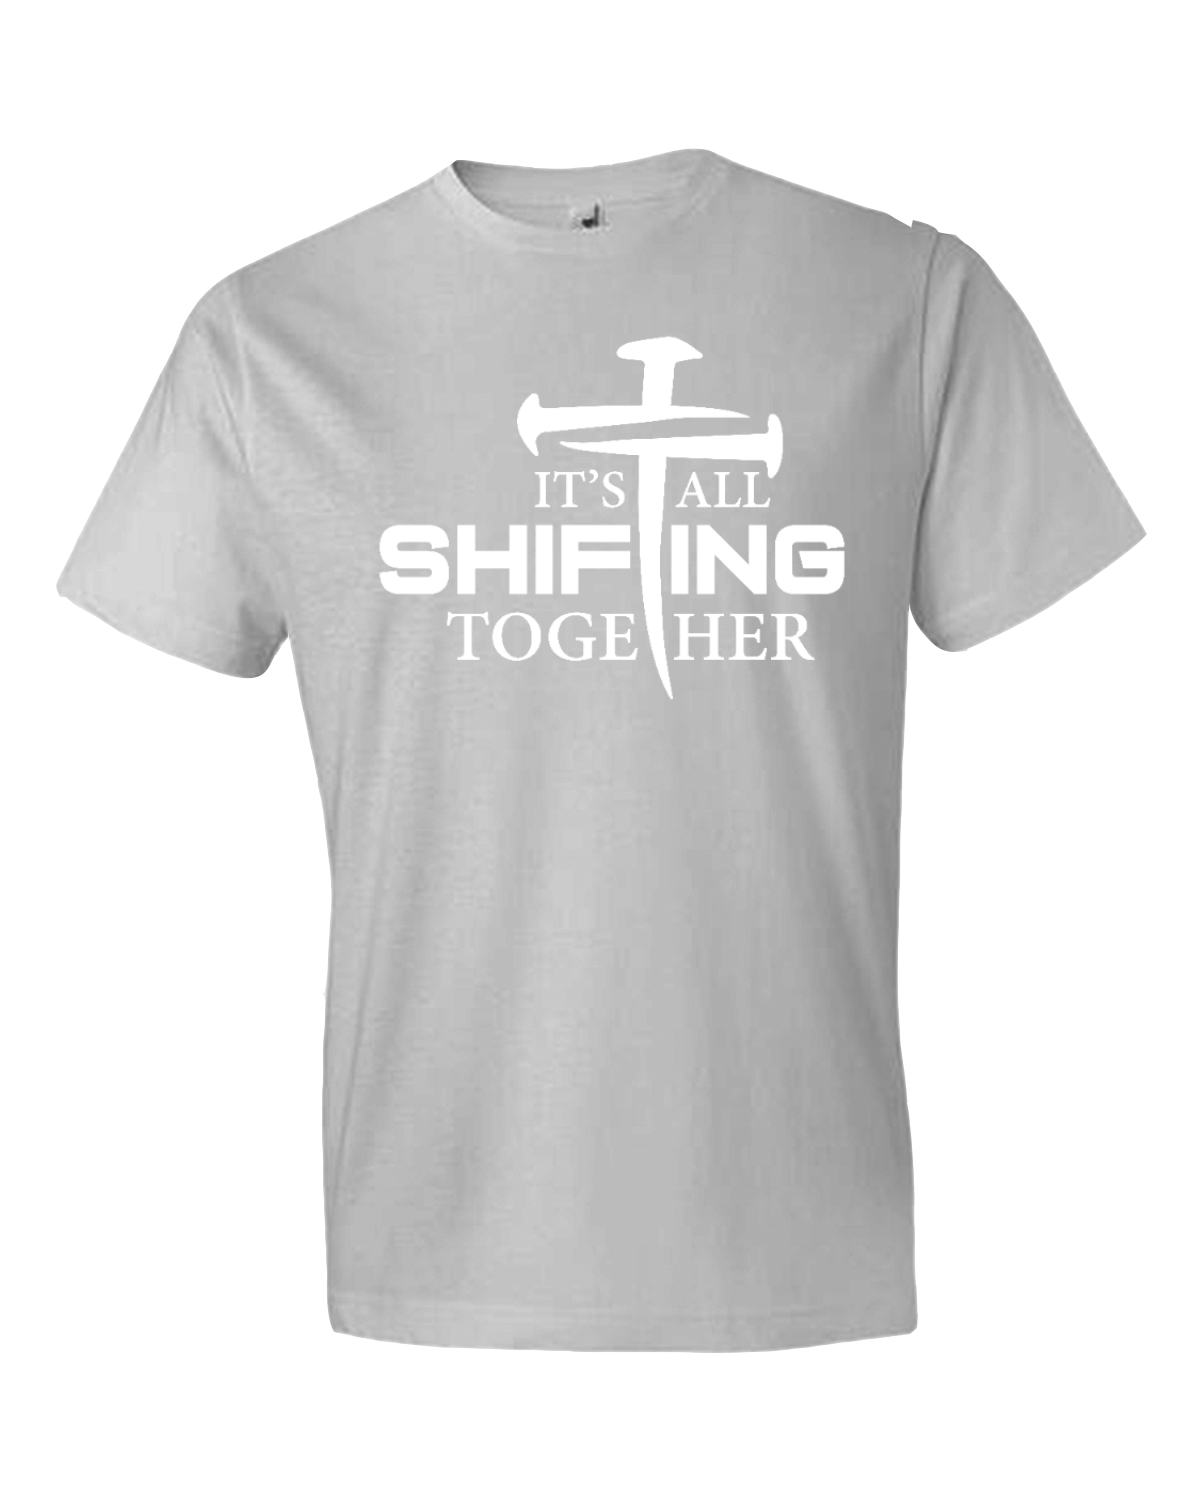 It's All Shifting Together Softstyle® Lightweight T-Shirt